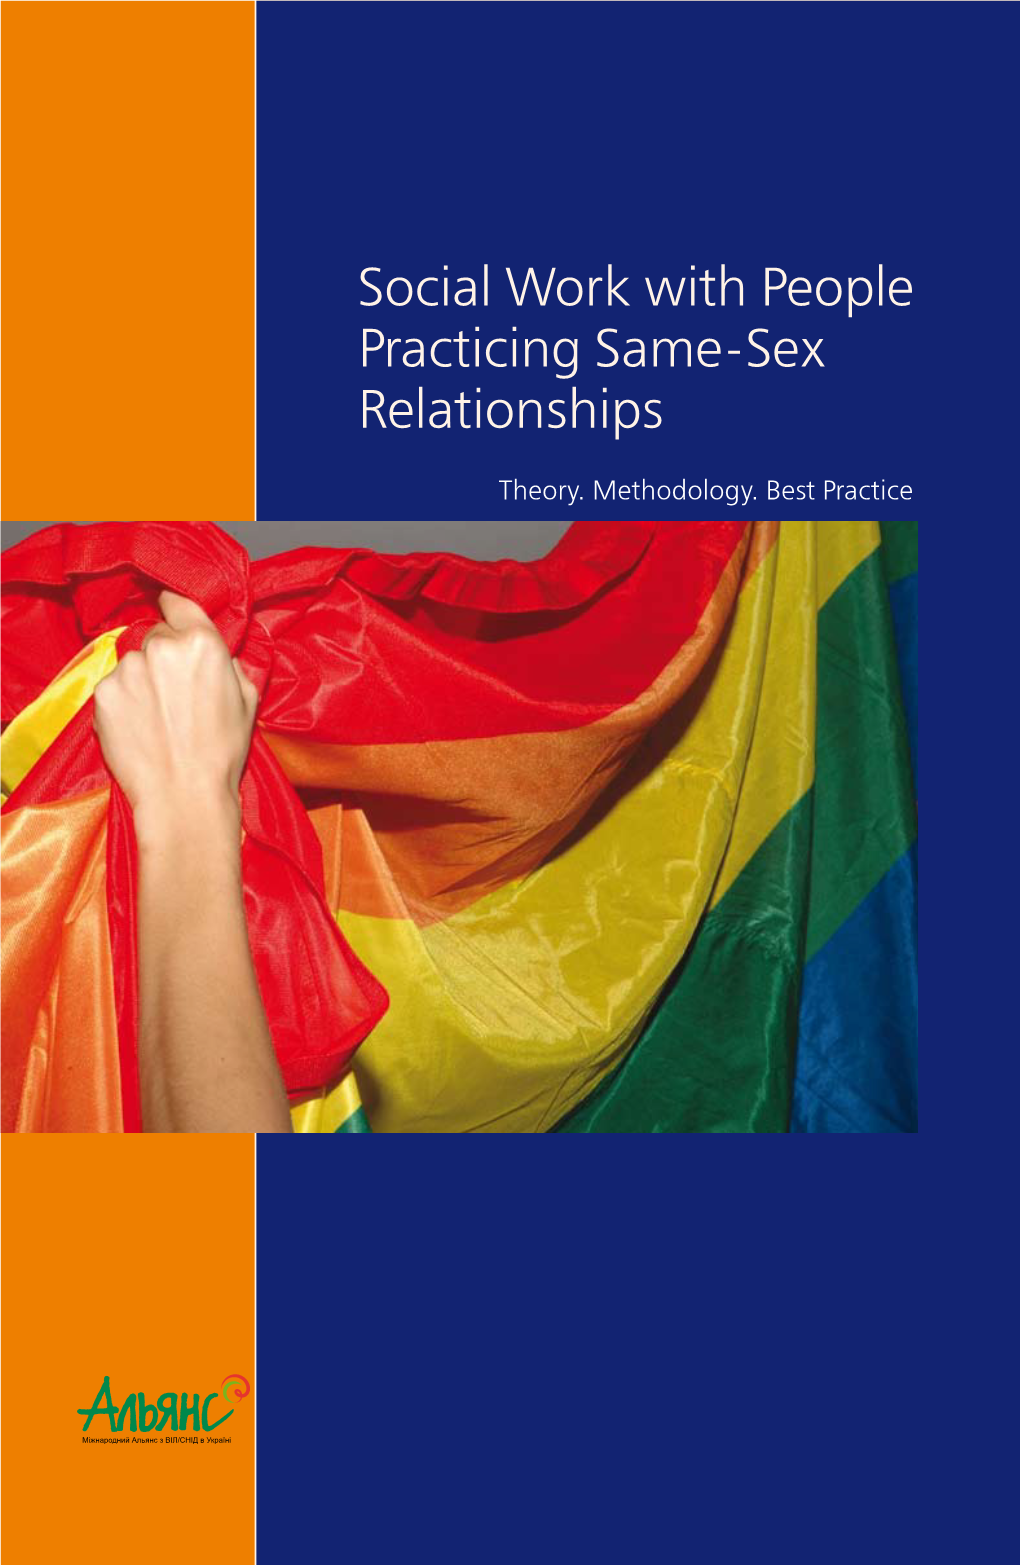 Social Work with People Practicing Same-Sex Relationships